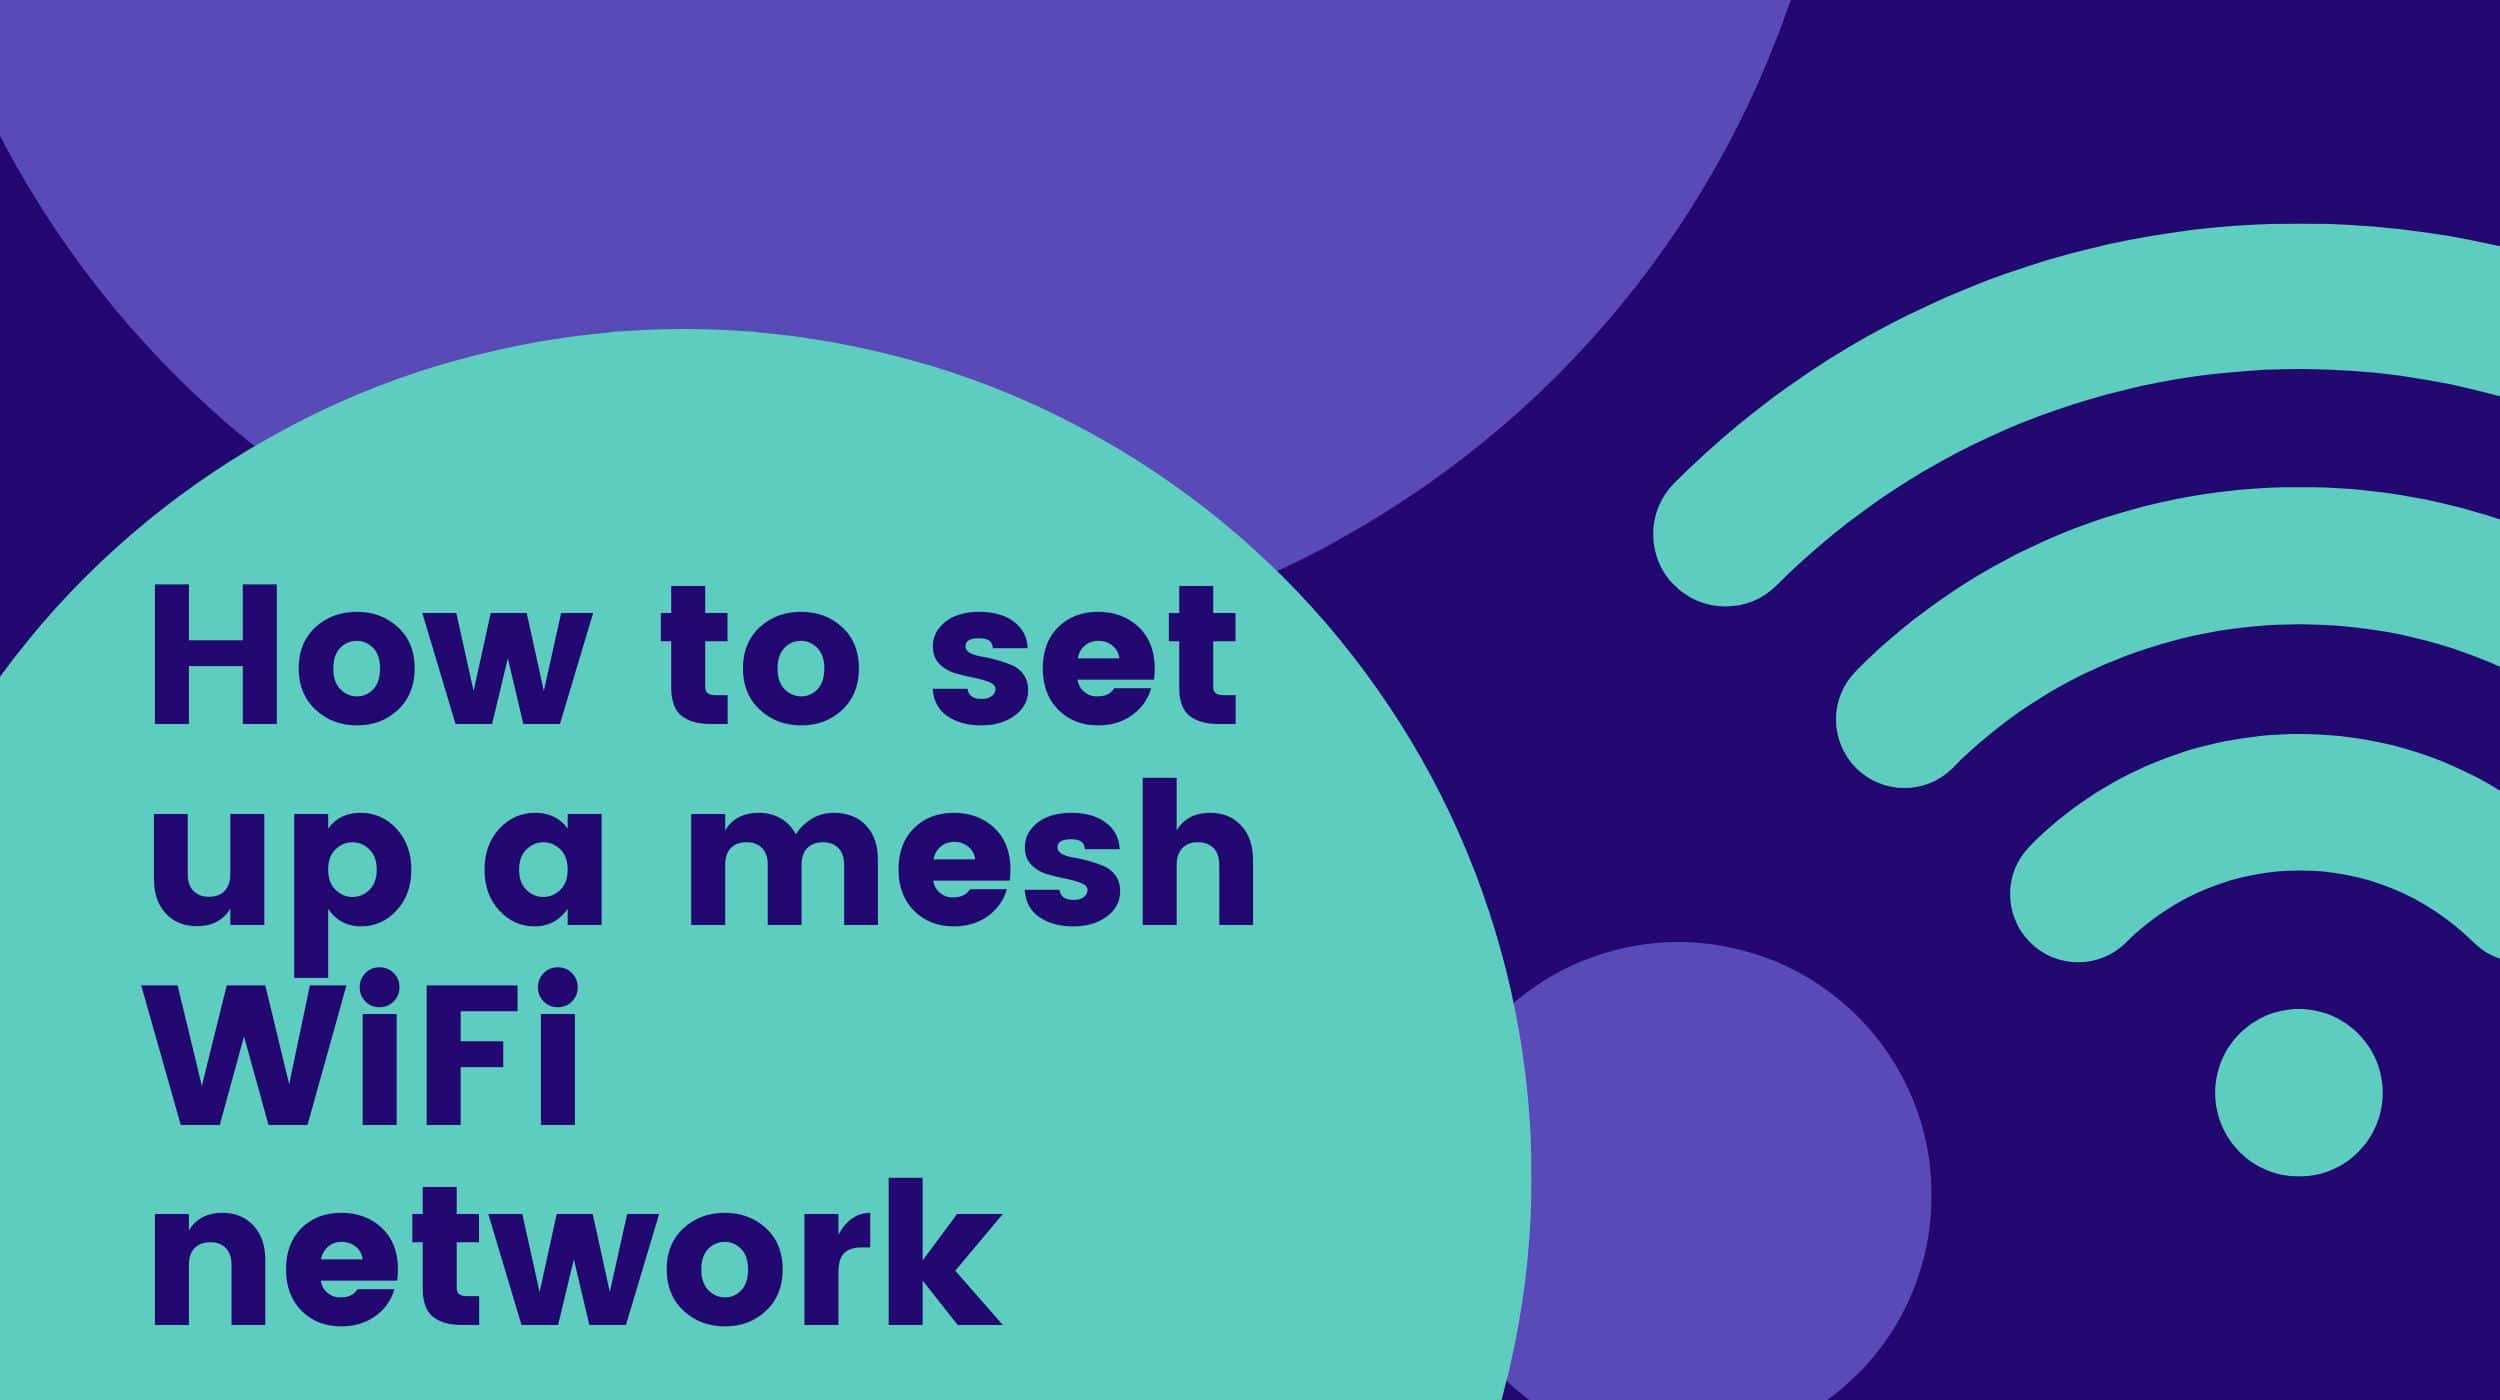 How to set up a mesh WiFi network